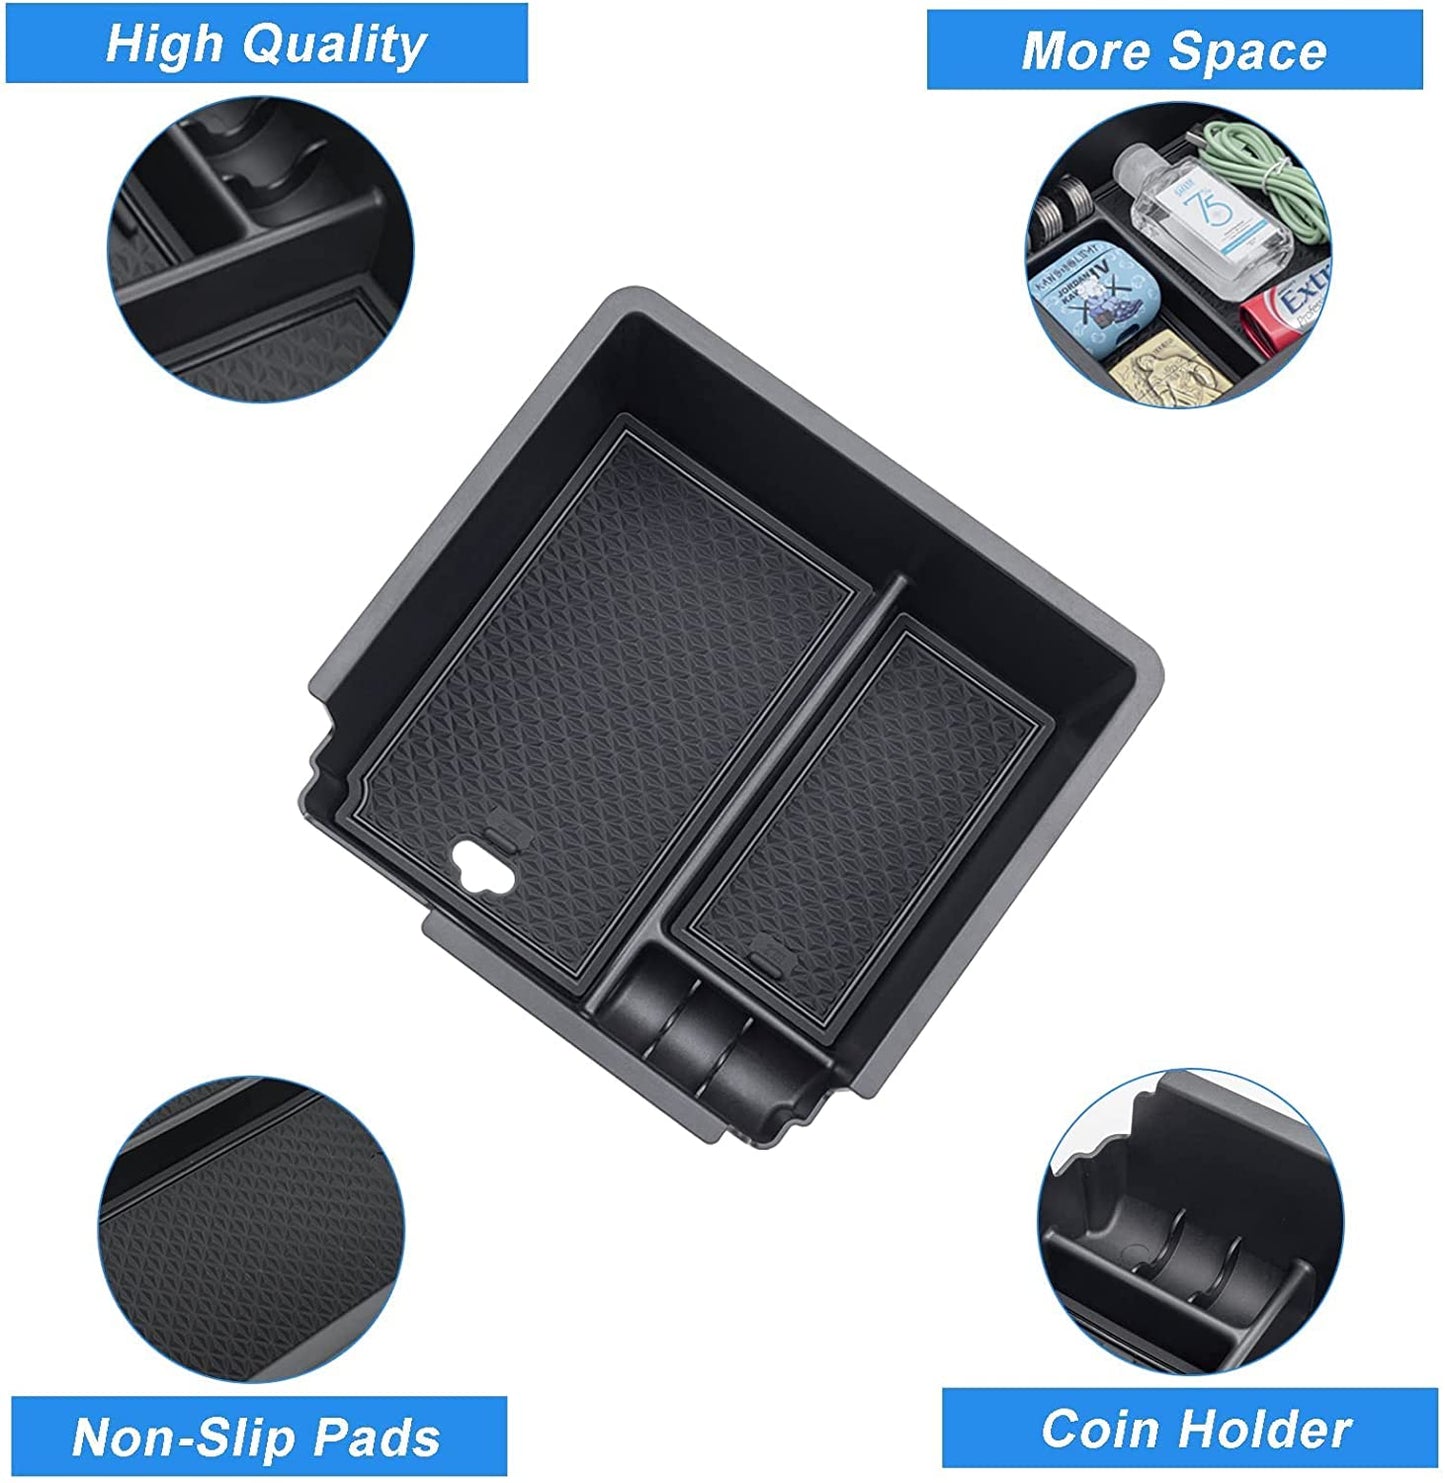 Compatible with 2019 2020 2021 2022 Ford Ranger Center Console Organizer ABS Plastic Material Armrest Box Insert Tray Accessories-Black